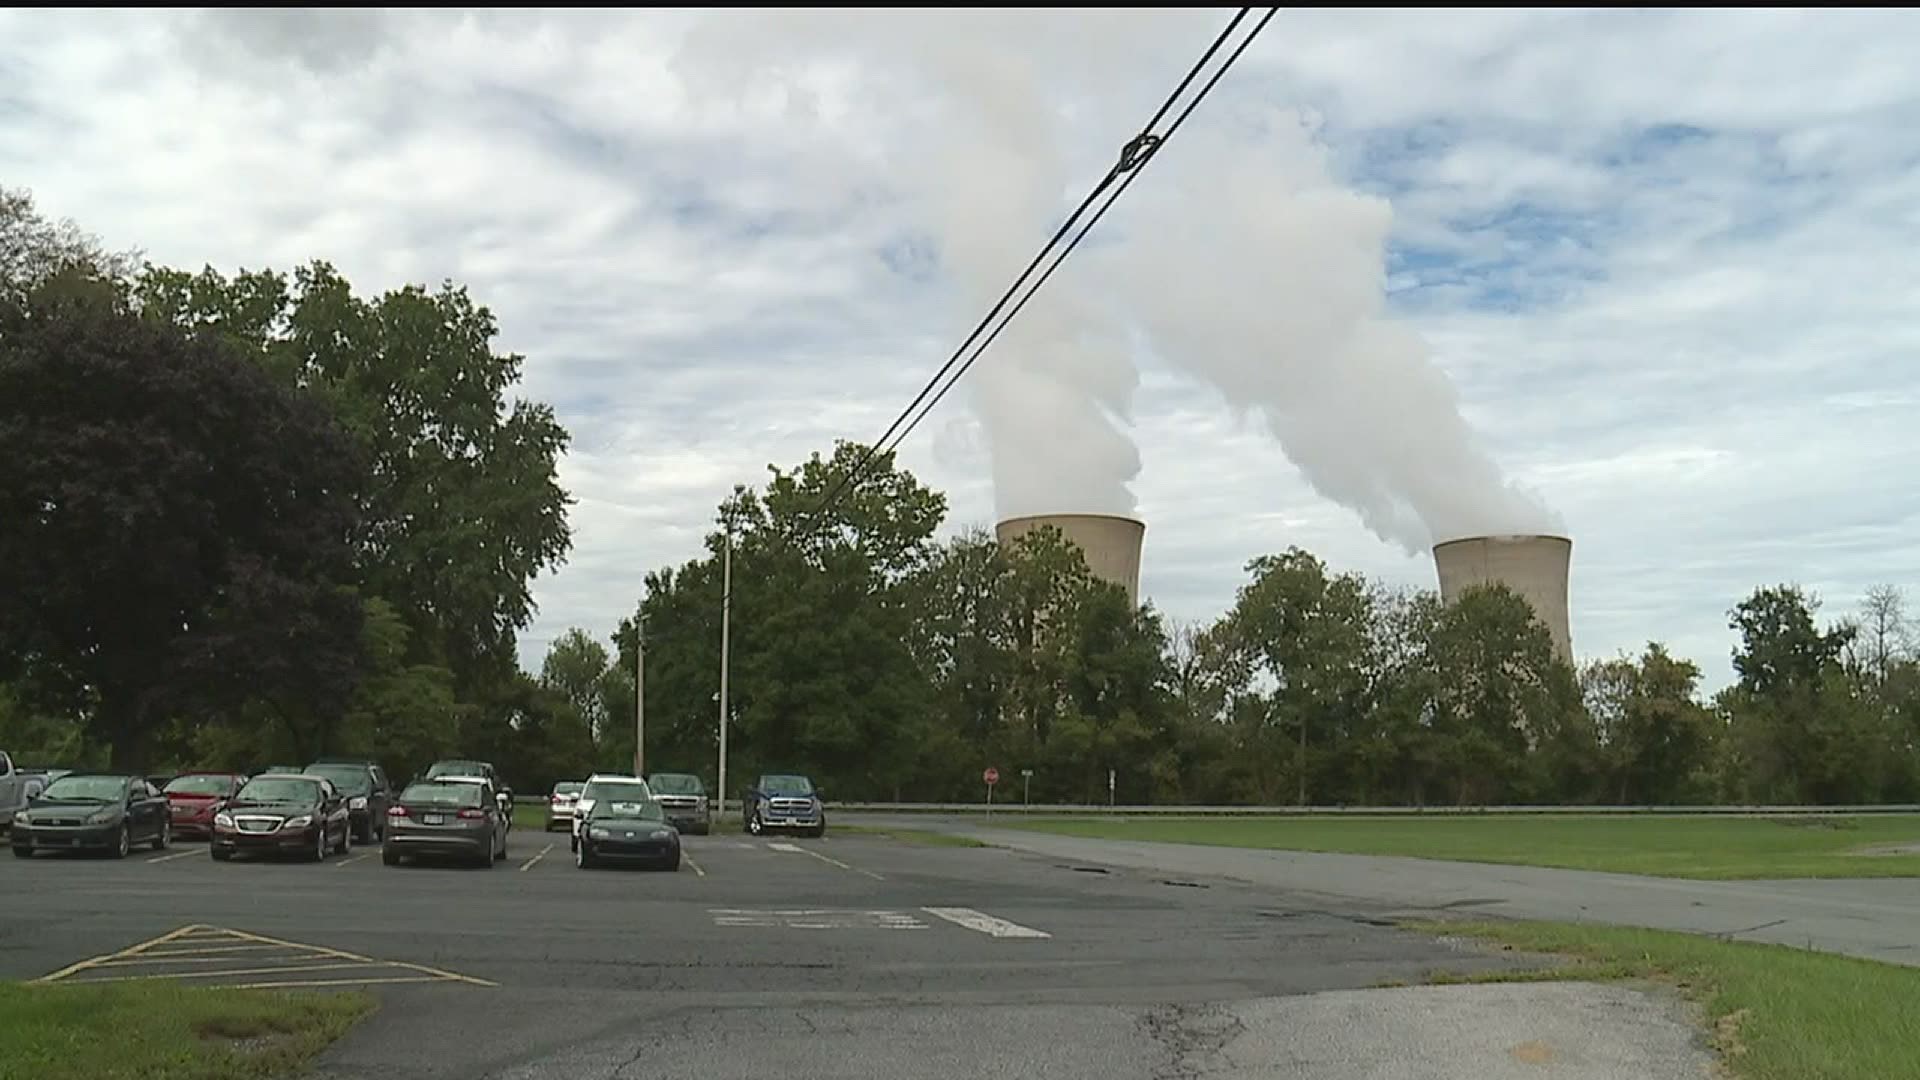 Three Mile Island Nuclear Generating Station has received approval to downsize its local emergency response planning and end its siren testing.